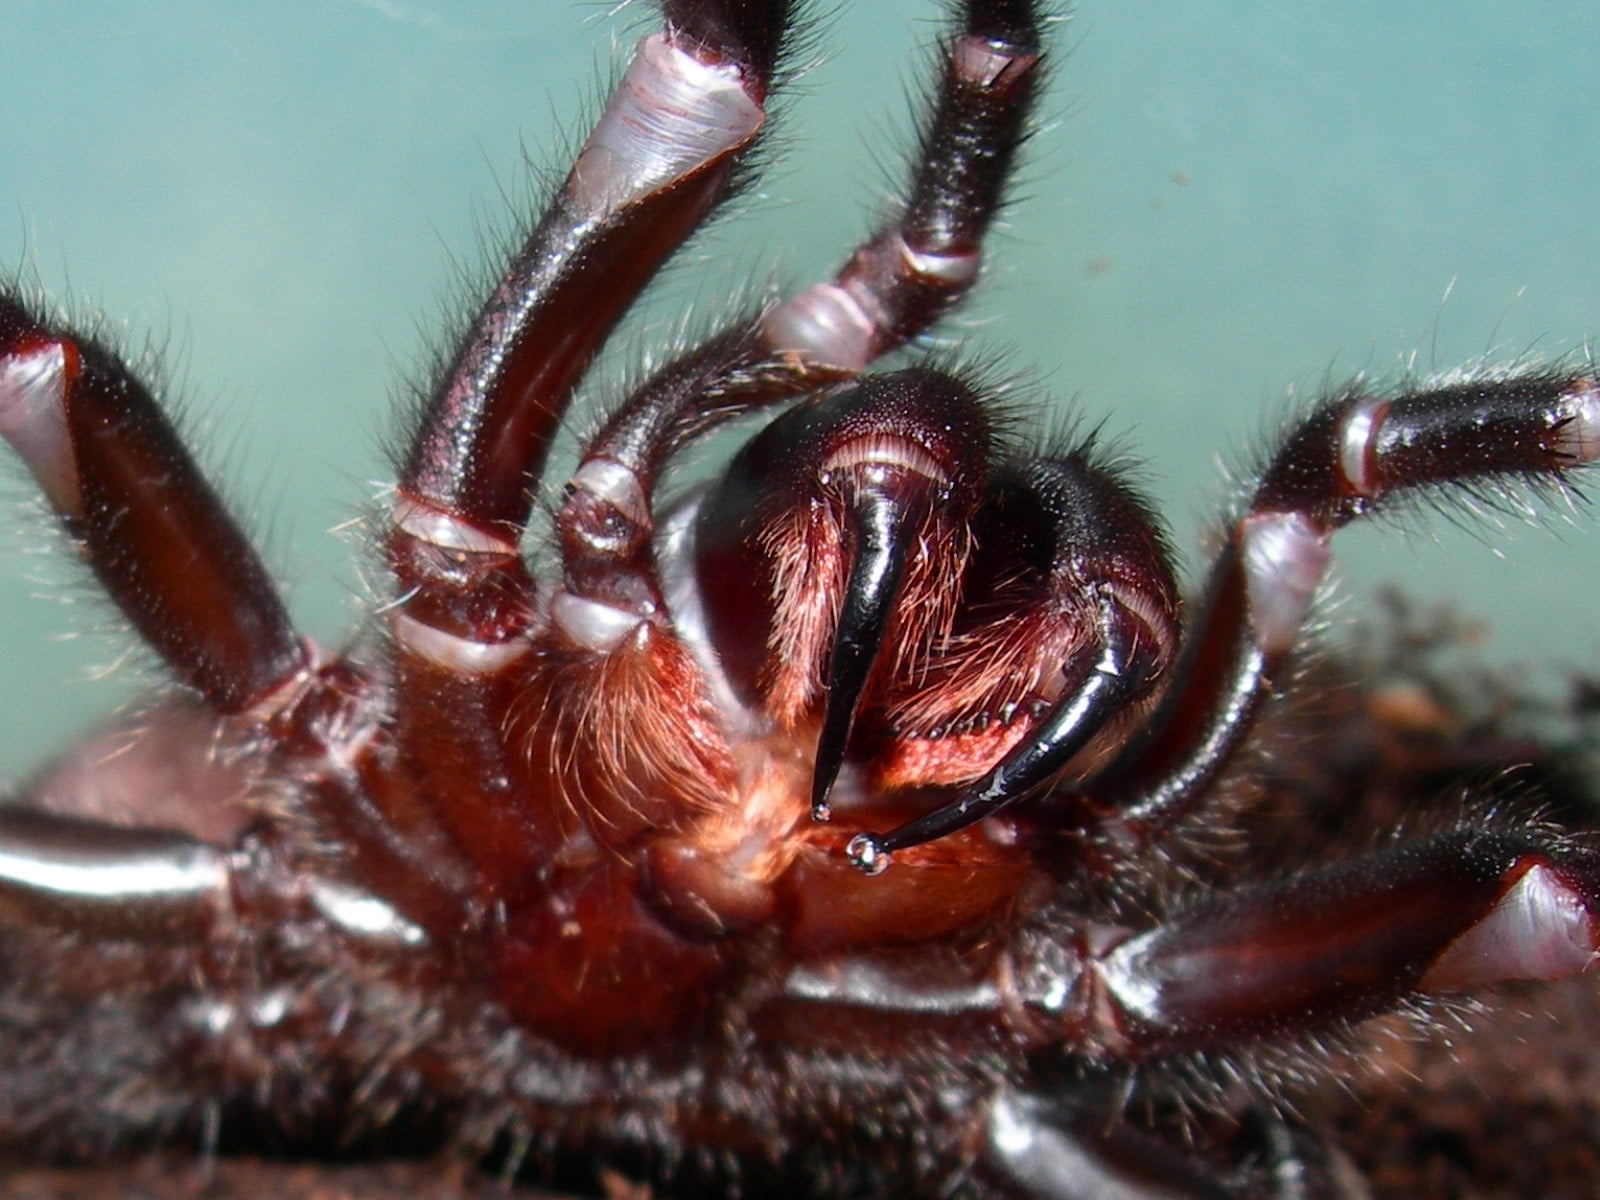 macro photography of brown spider